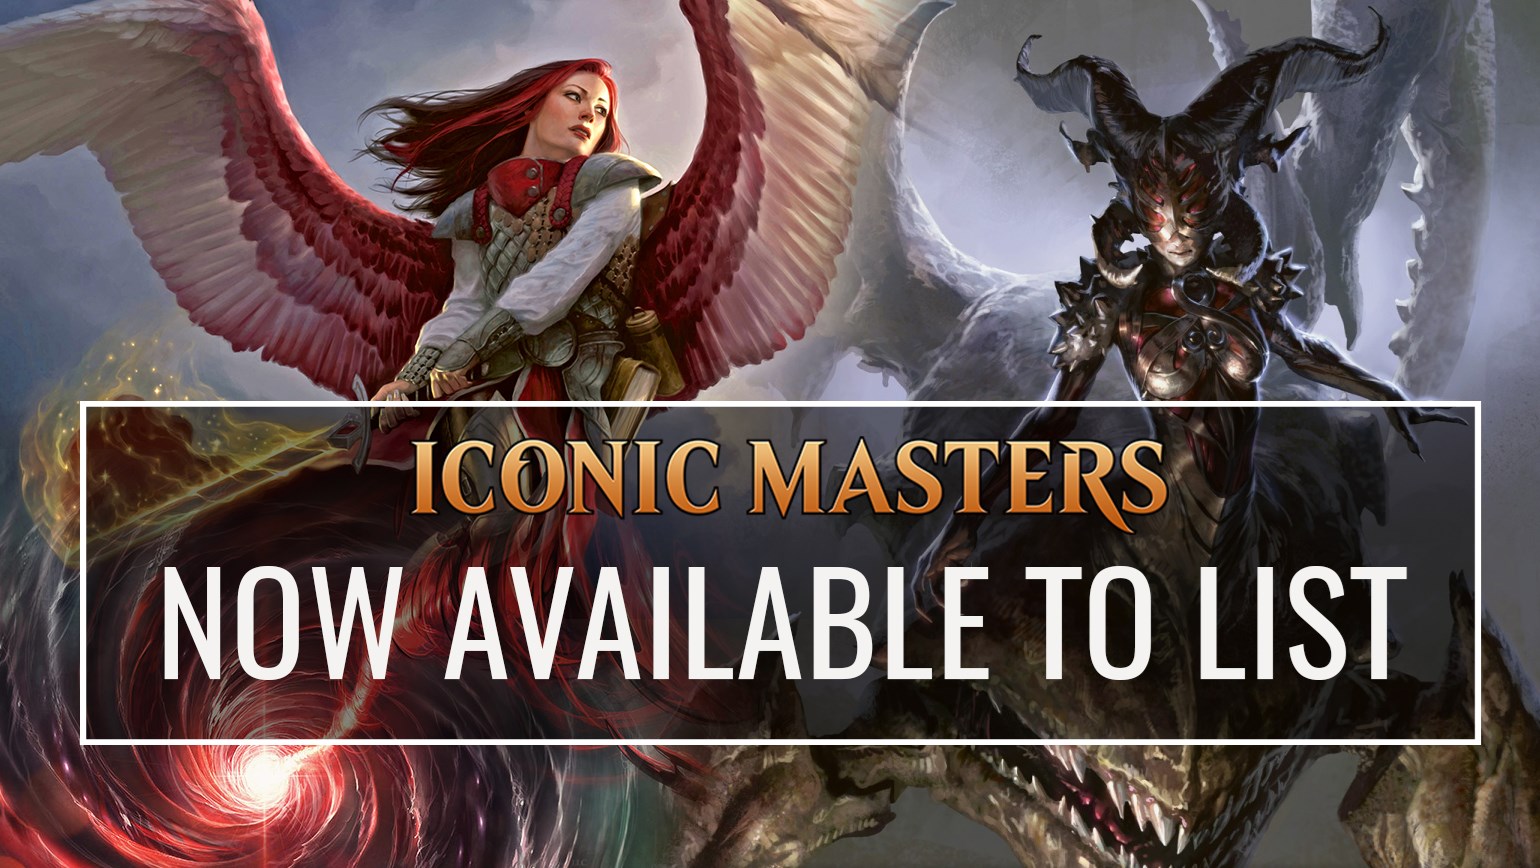 Iconic Masters Fully Available to List on TCGplayer